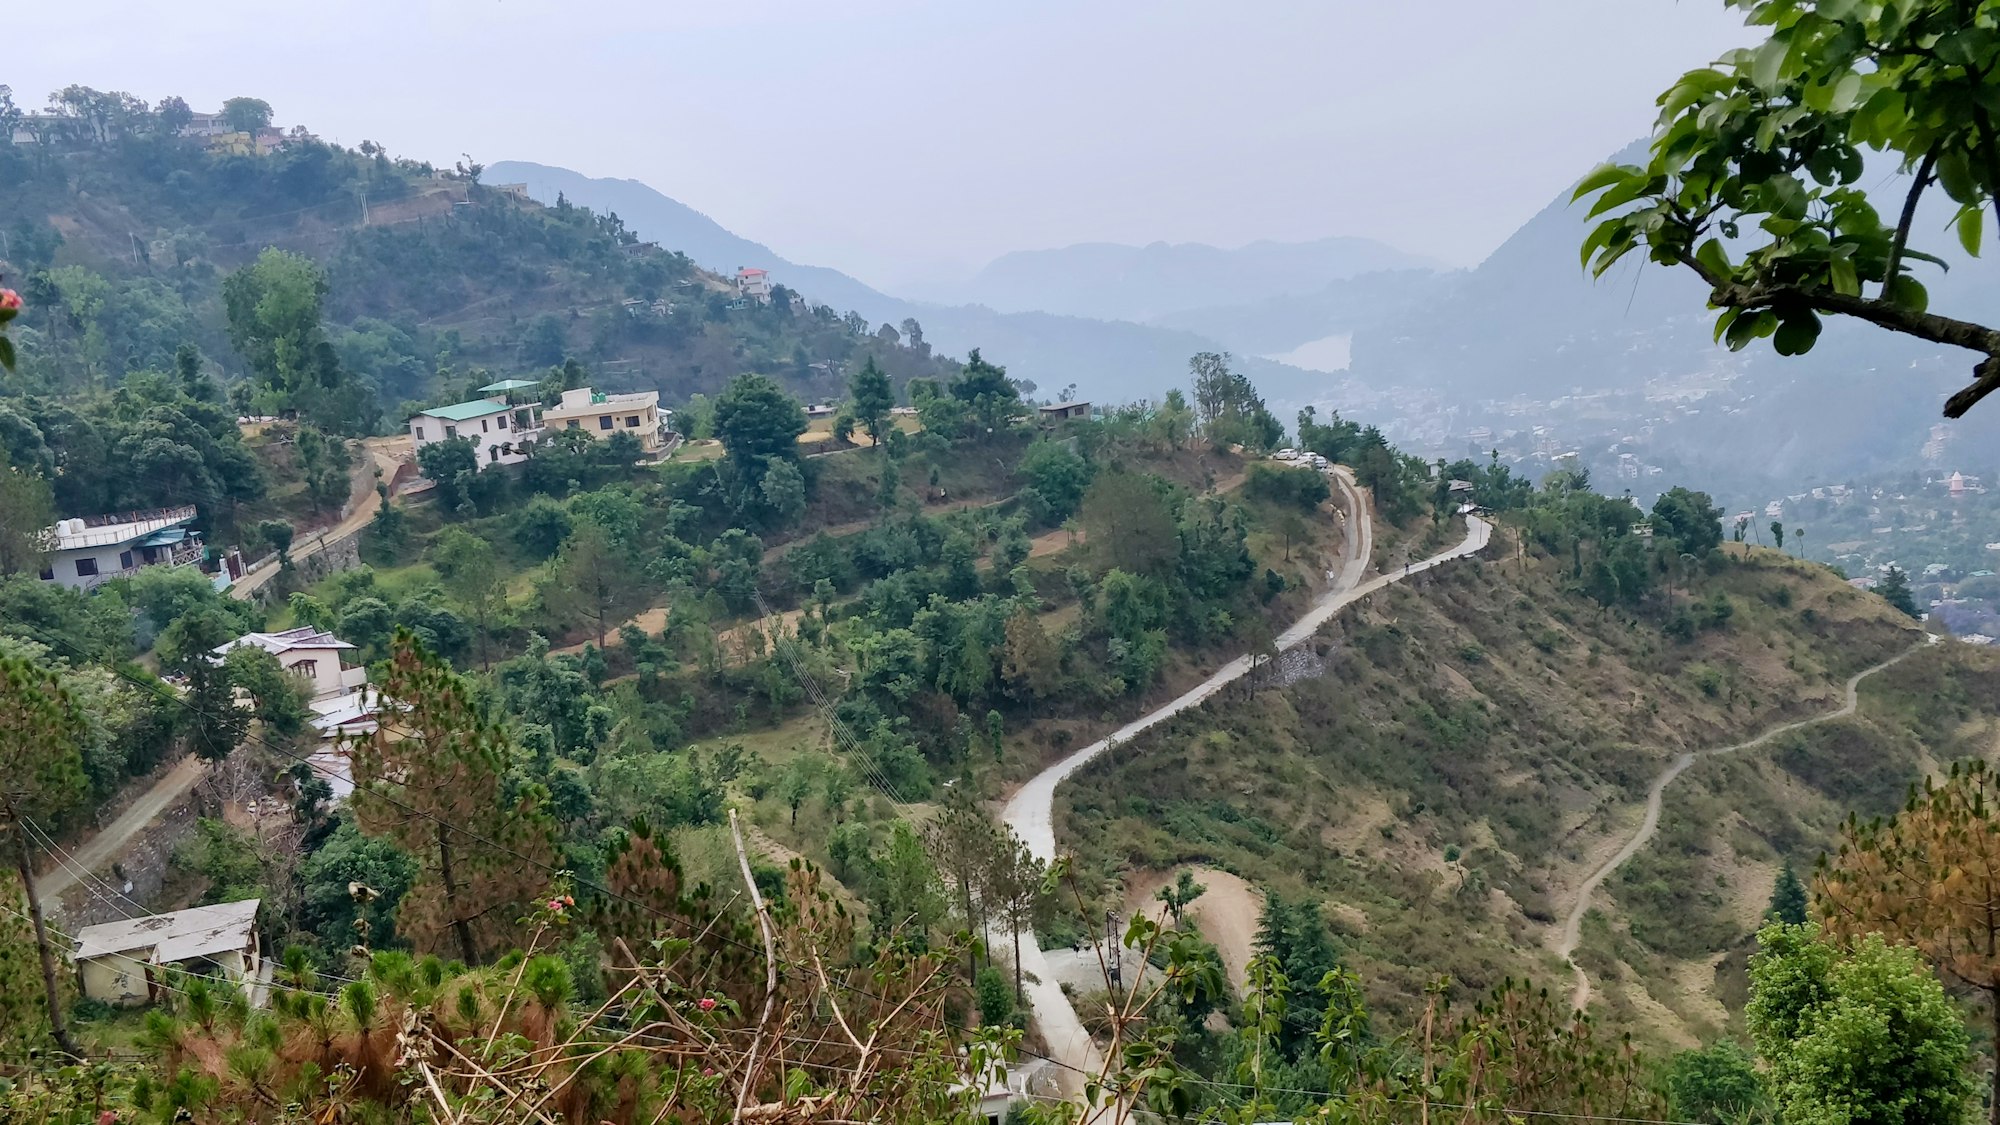 What a beautiful hike in a hill station in India Uttarakhand . Had gone for a jog up the hills and noticed this amazing view with a perfect forked road. I wish I had a better camera to capture the whole glory